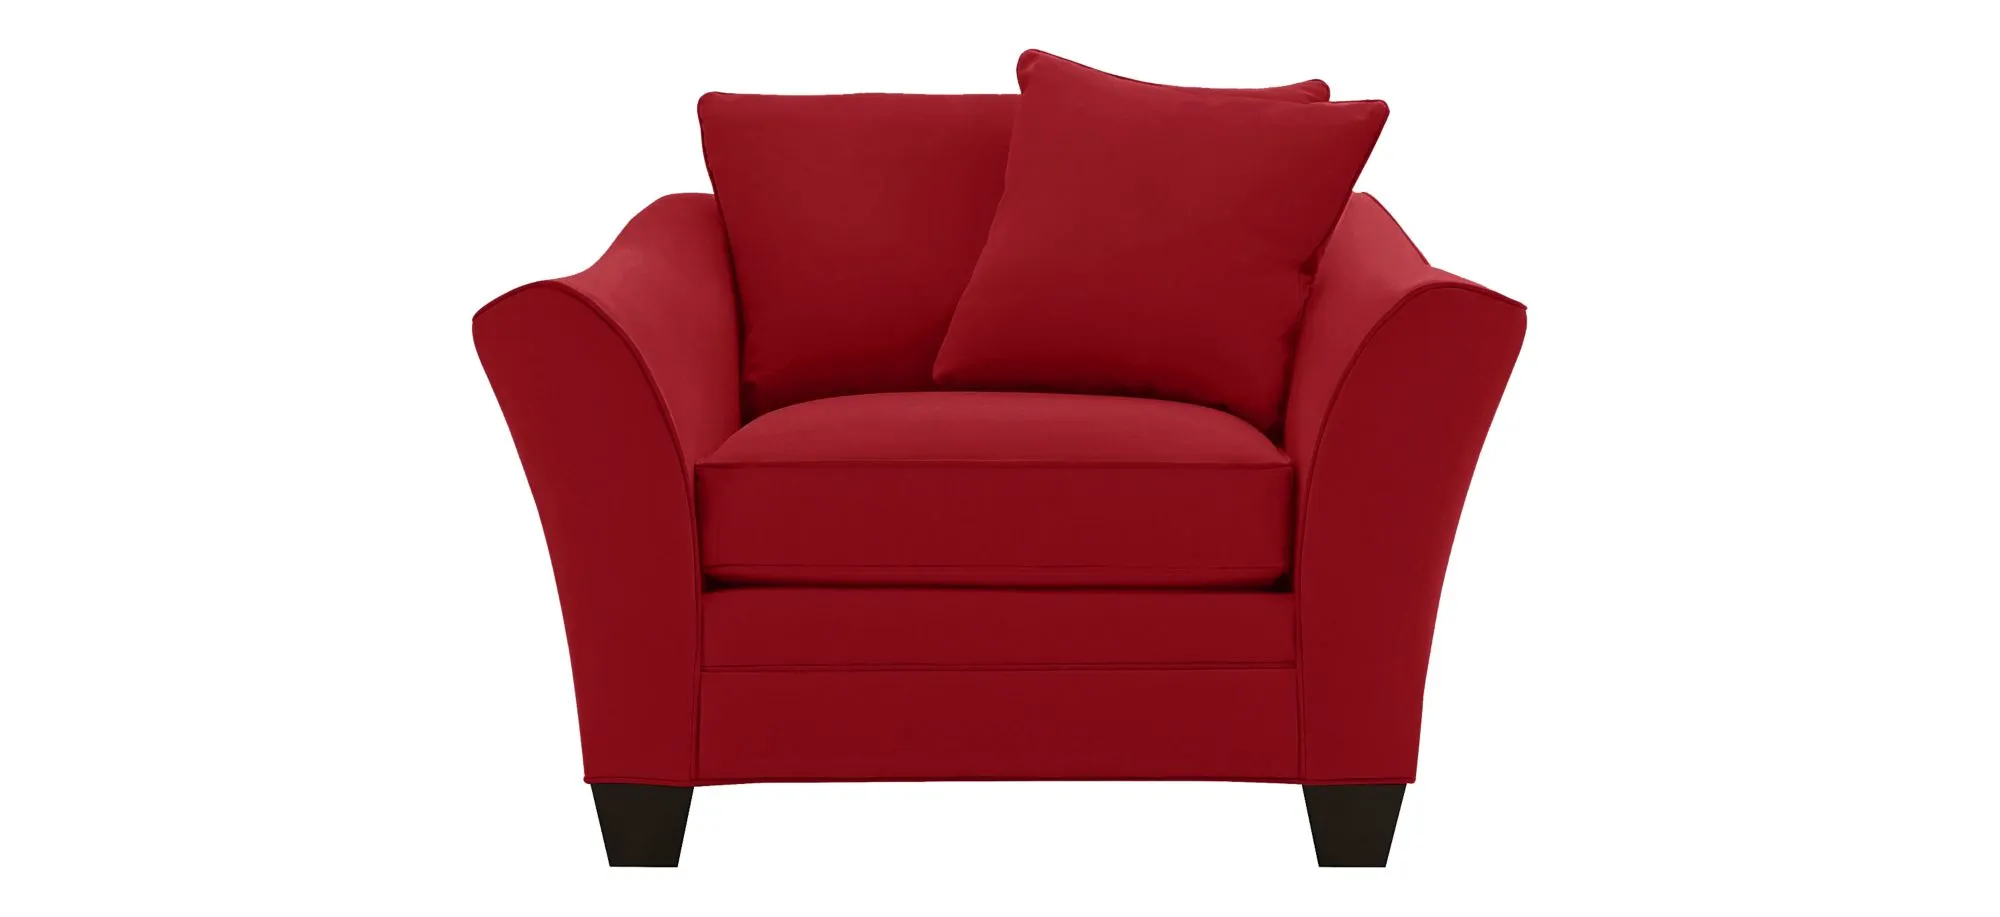 Briarwood Chair in Suede So Soft Cardinal by H.M. Richards